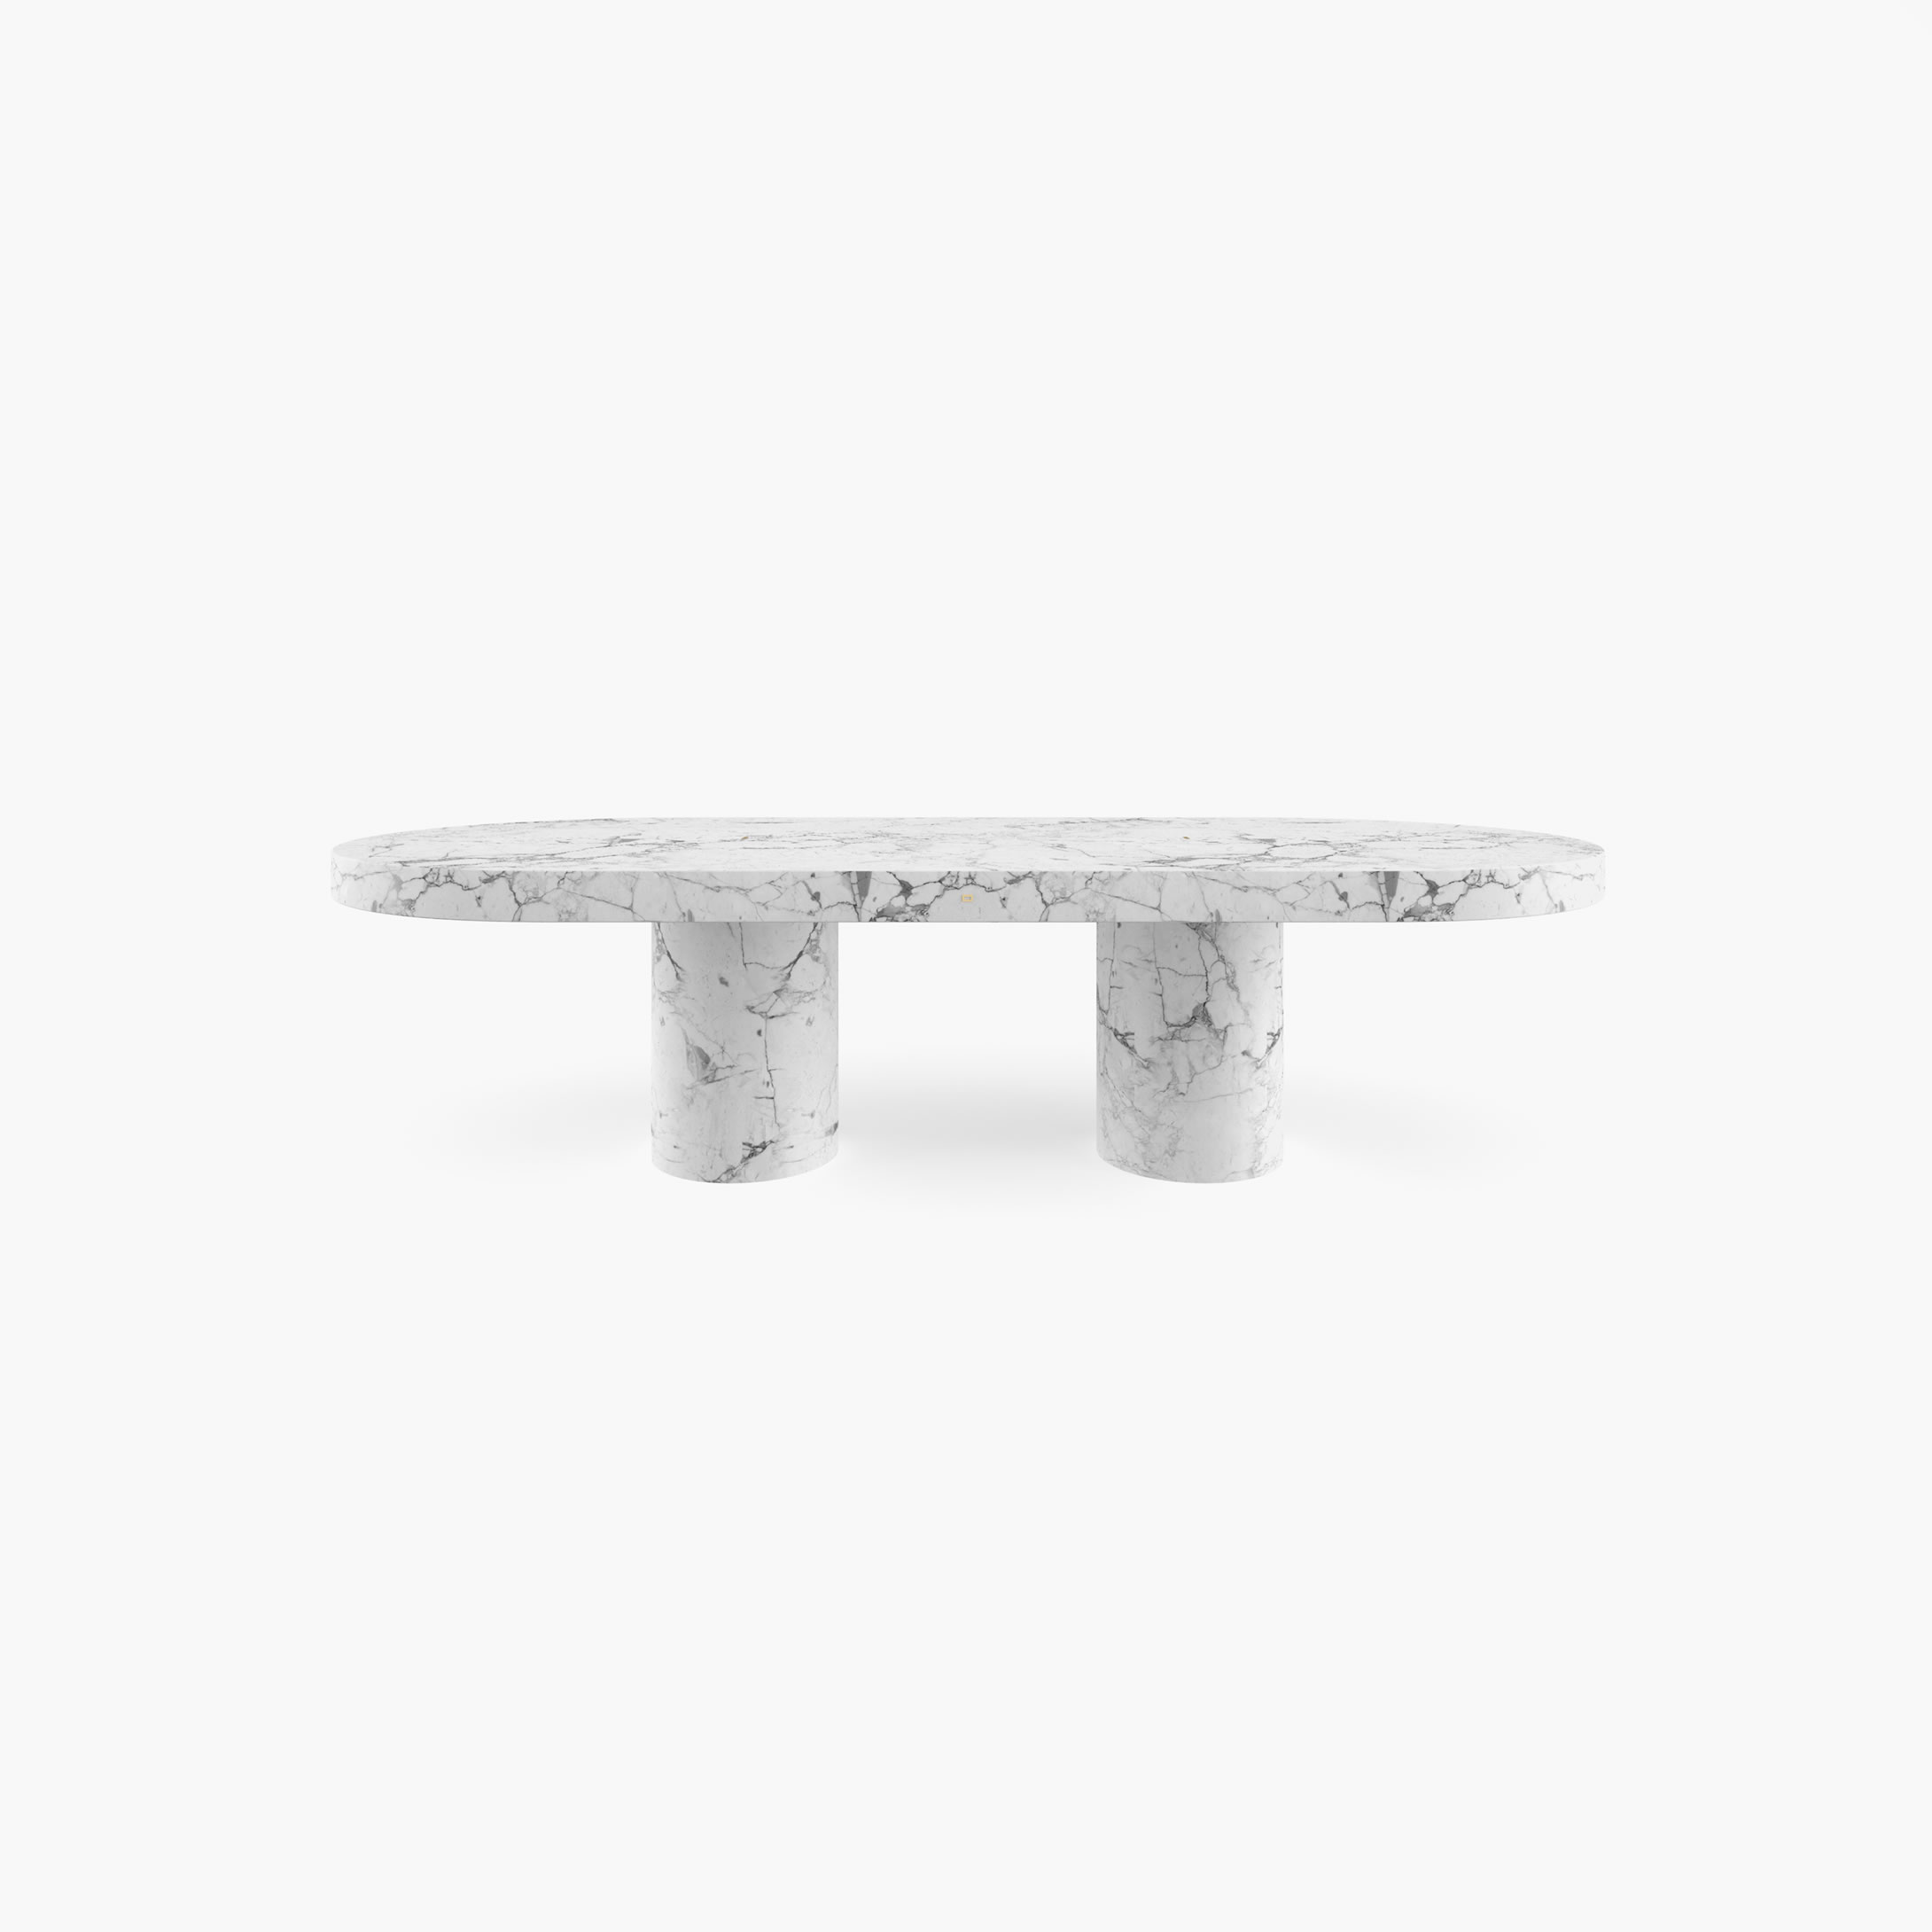 Dining Table Cylinder legs White Arabescato Marble avant gard Dining Room minimalism Dining Tables FS 178 FELIX SCHWAKE